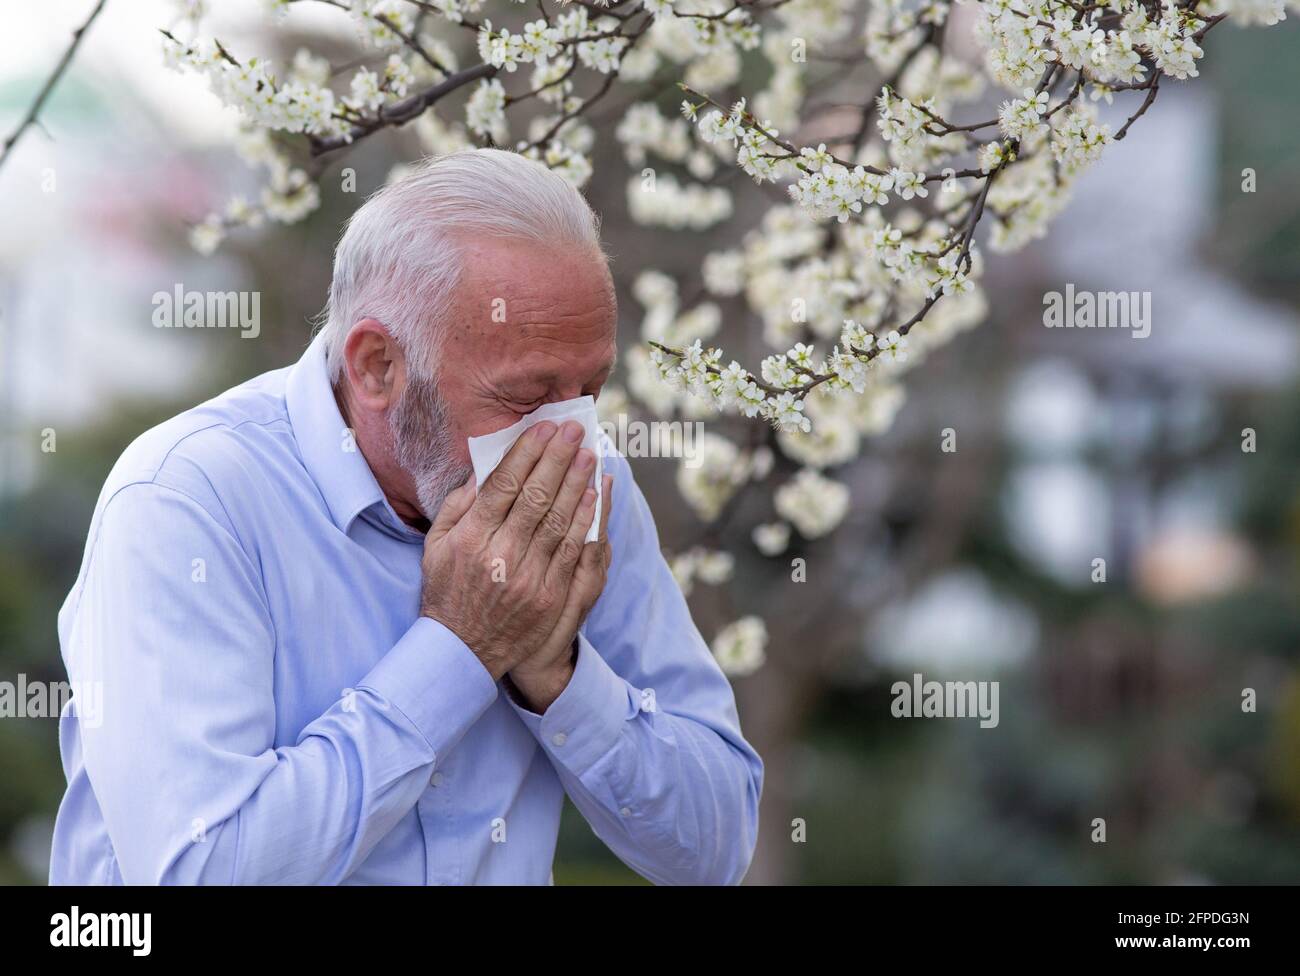 Old man with allergy symptoms sneezing into tissue. Senior suffering from hay fever coughing outside. Stock Photo